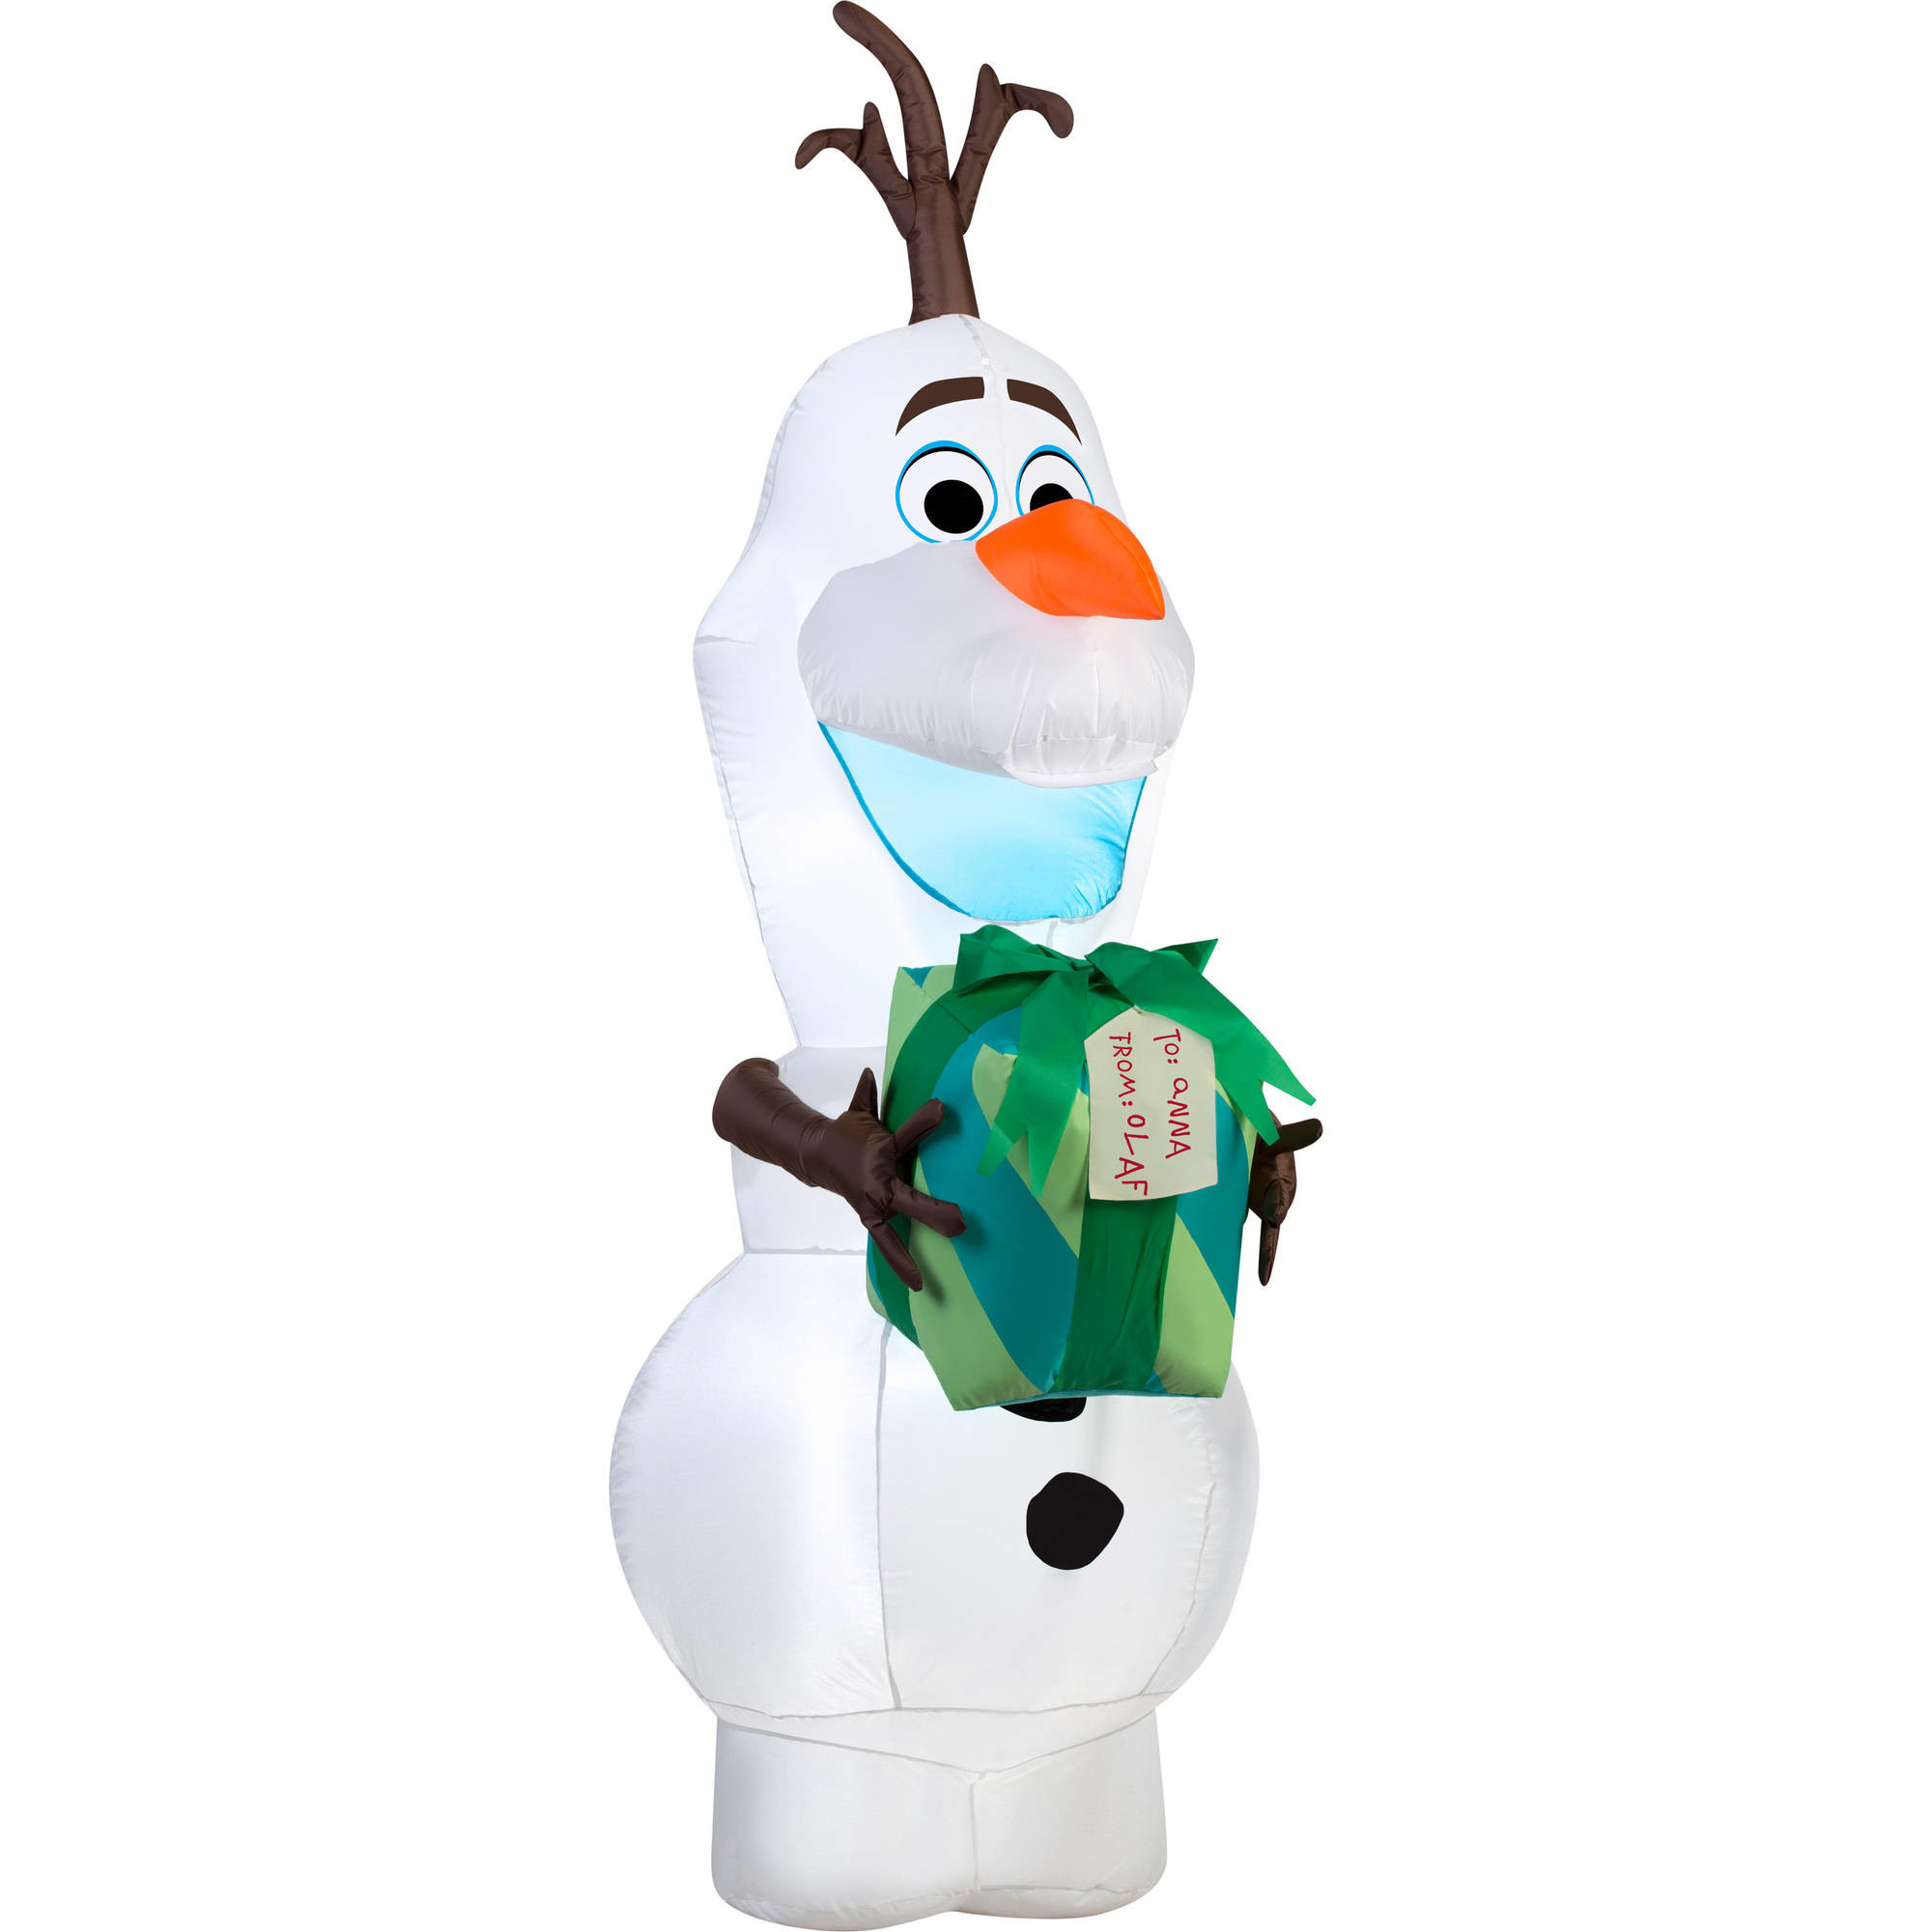 2000x2000 Olaf Christmas Decorations Part - 28: Gemmy Airblown Christmas Inflatables  Disney Olaf With Gift,